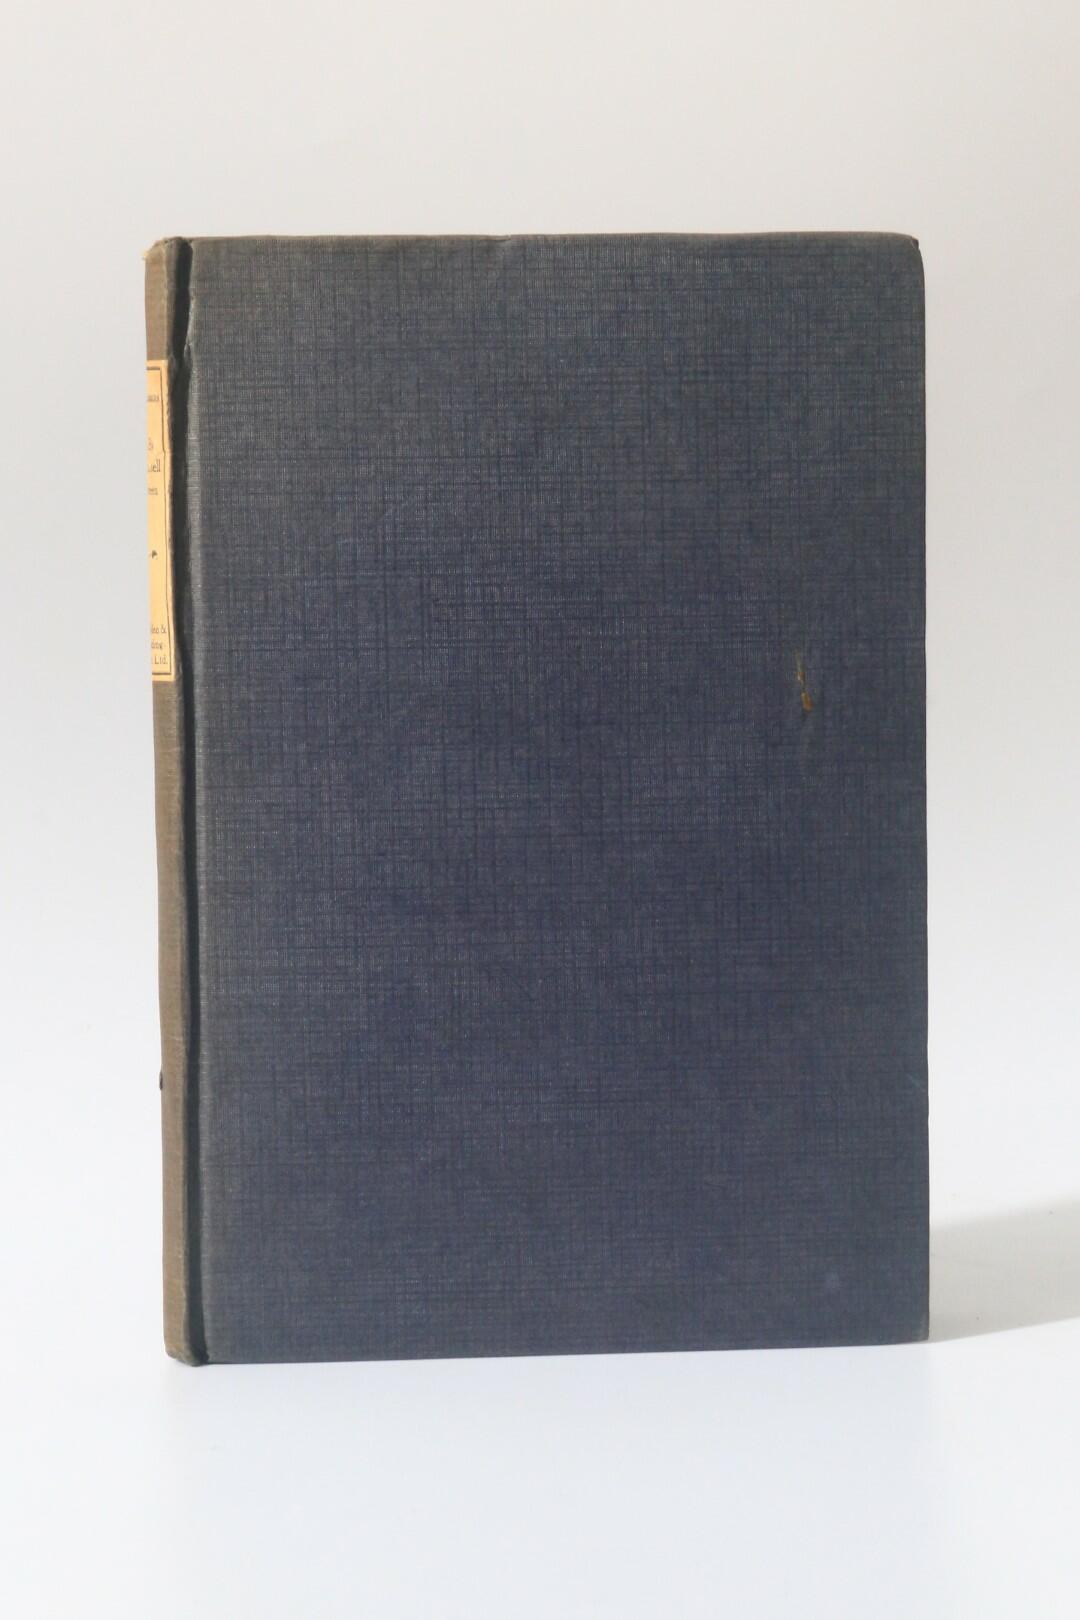 Russell Green - Passions - Holden & Hardingham, 1921, Signed First Edition.